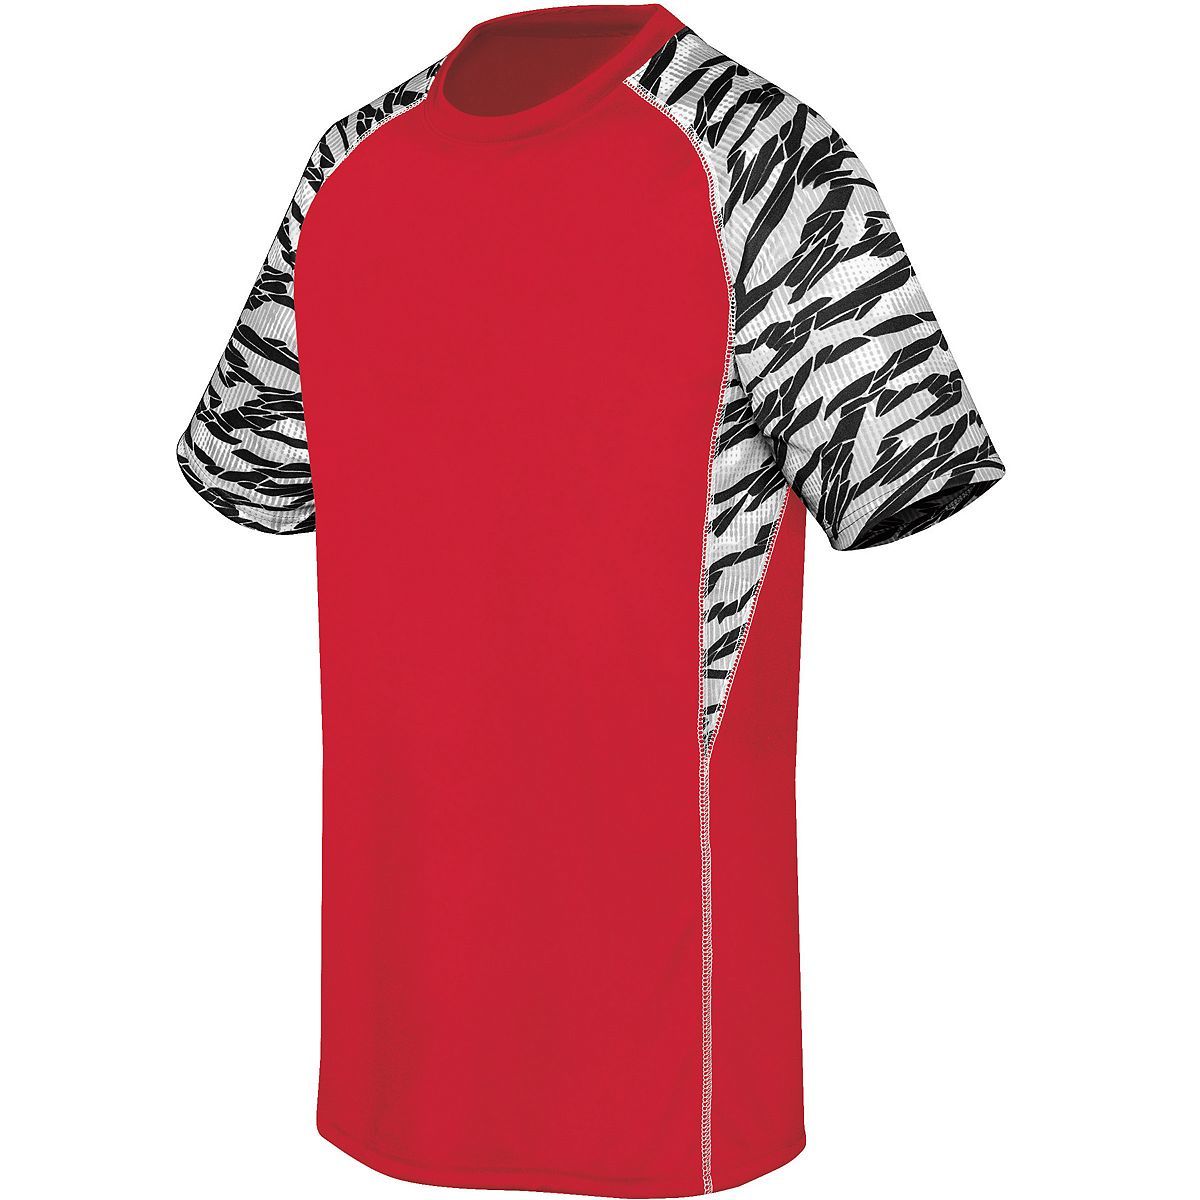 High 5 Youth Evolution Printed Short Sleeve Jersey in Scarlet/Fragment Print/White  -Part of the Youth, Youth-Jersey, High5-Products, Shirts product lines at KanaleyCreations.com